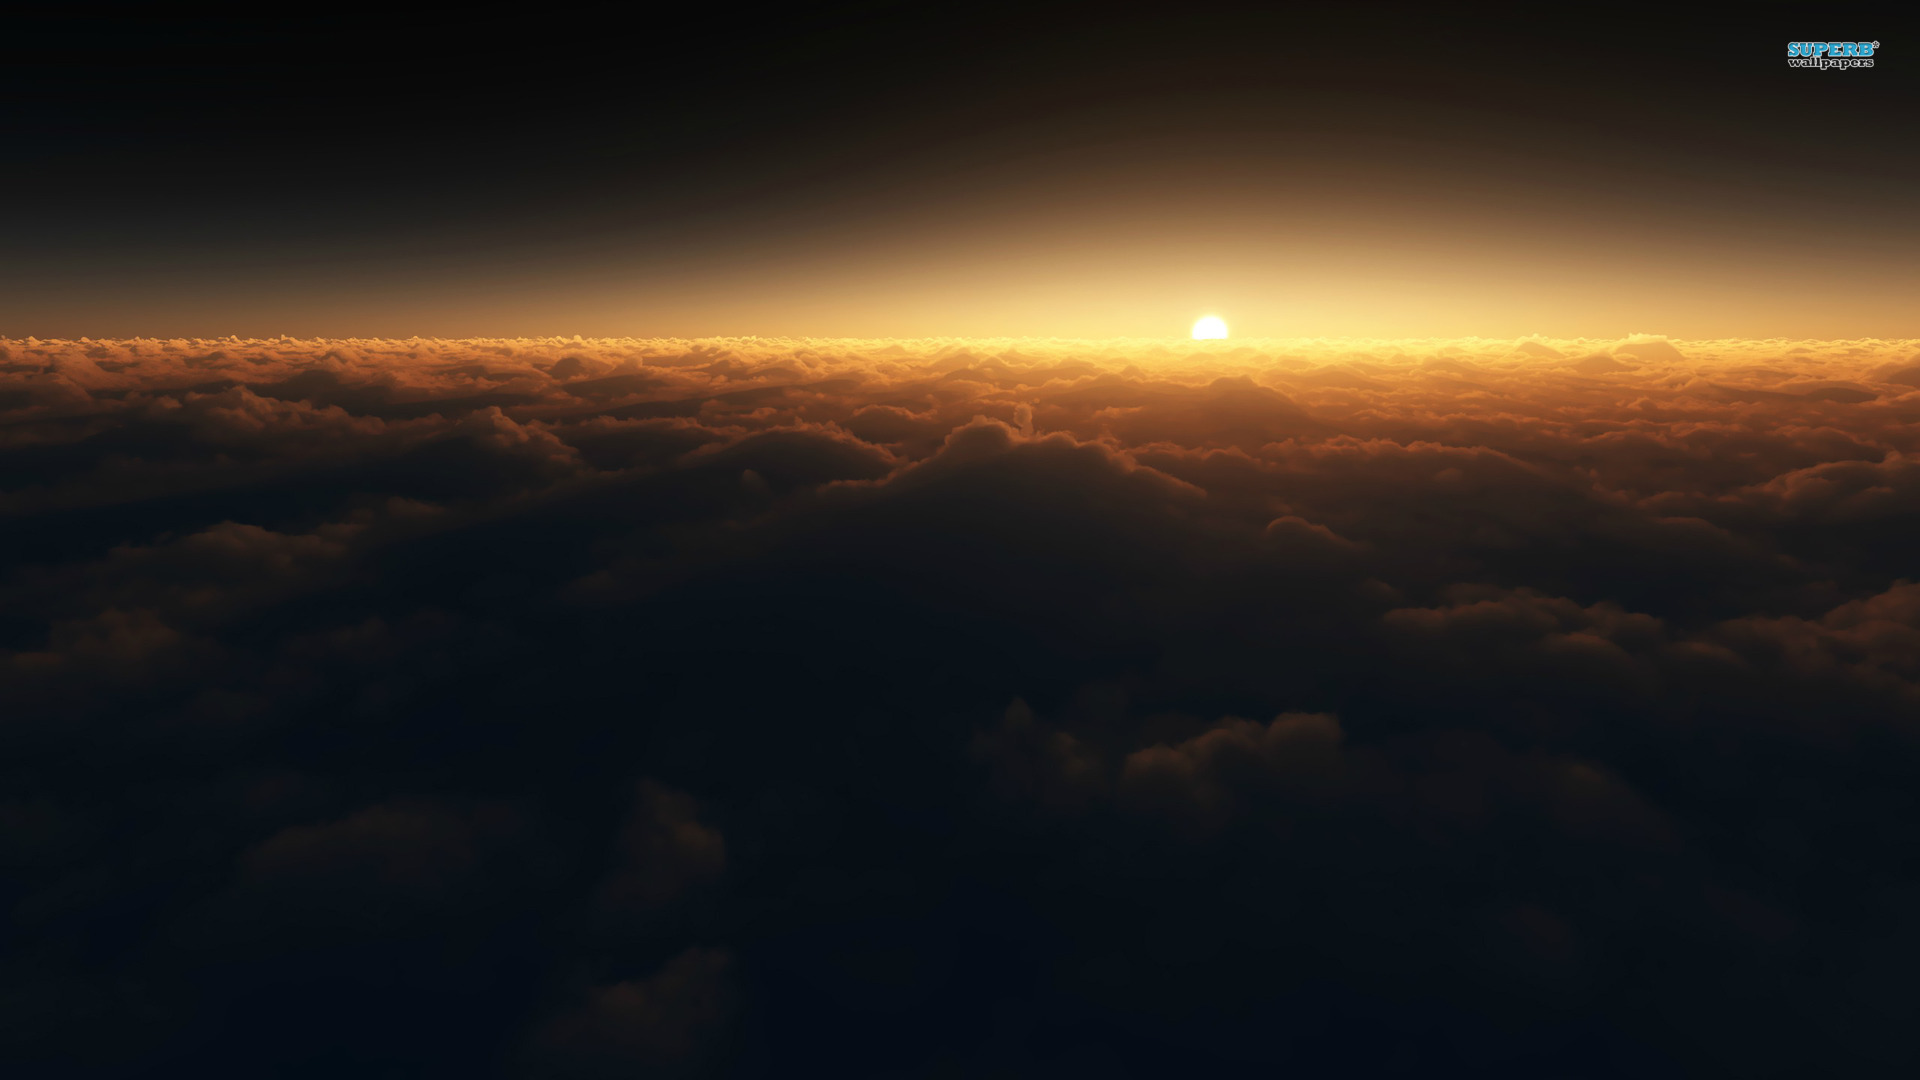 Sunset above the clouds wallpaper - Photography wallpapers - #14771